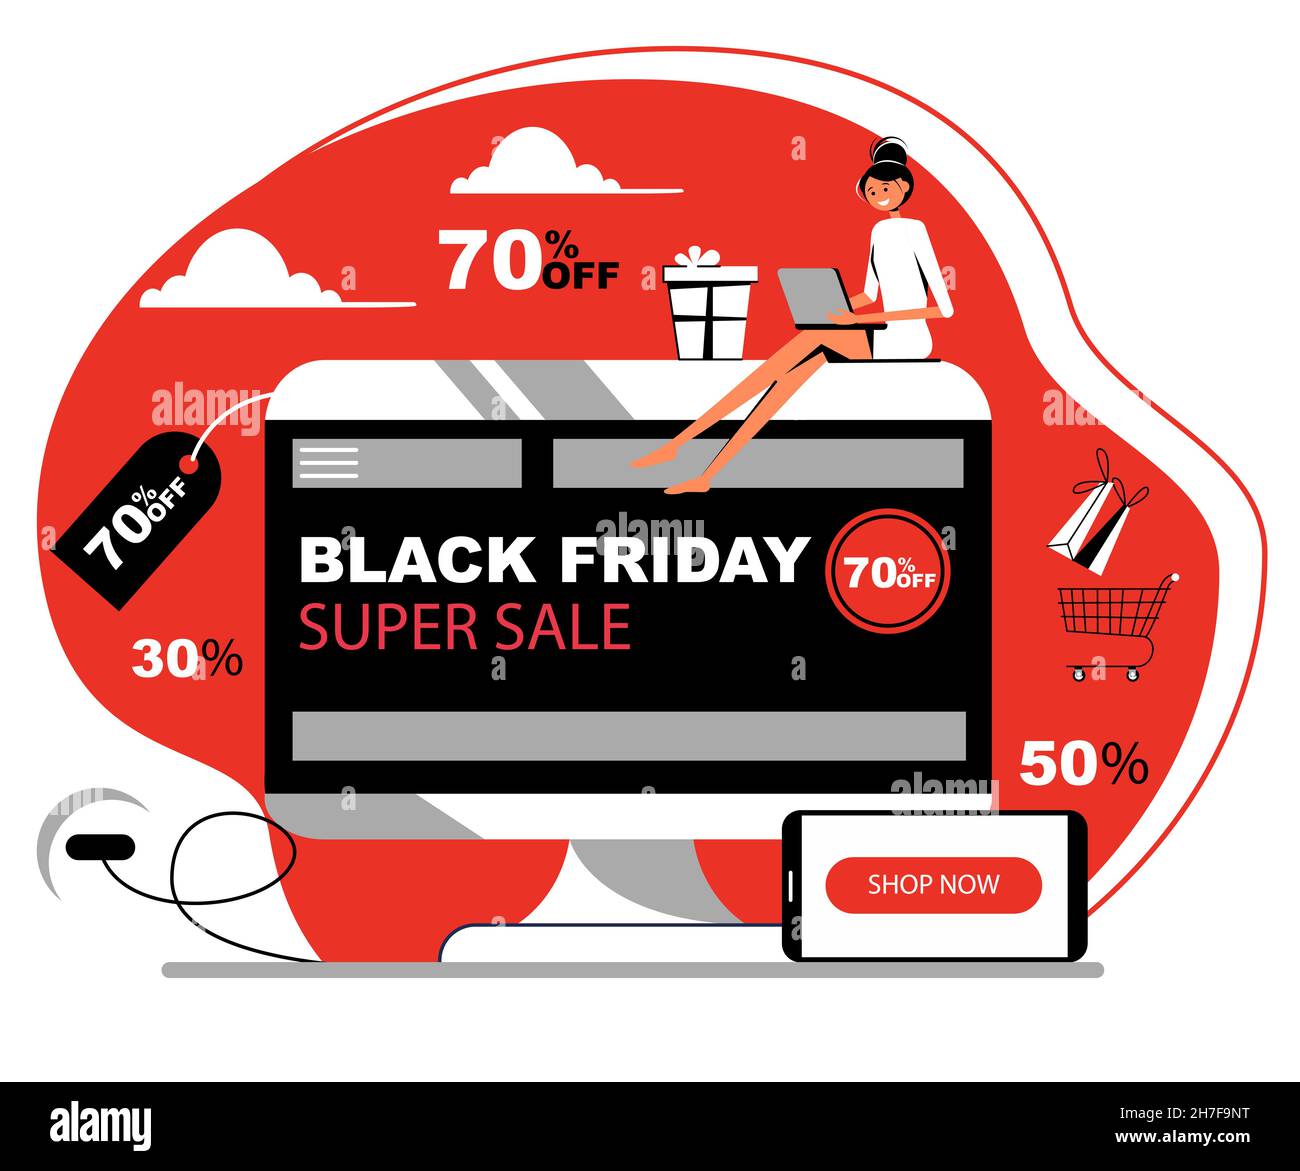 Black friday. Modern flat design concept with desktop computer, smartphone and woman. Sale. Online shopping. Stock Vector